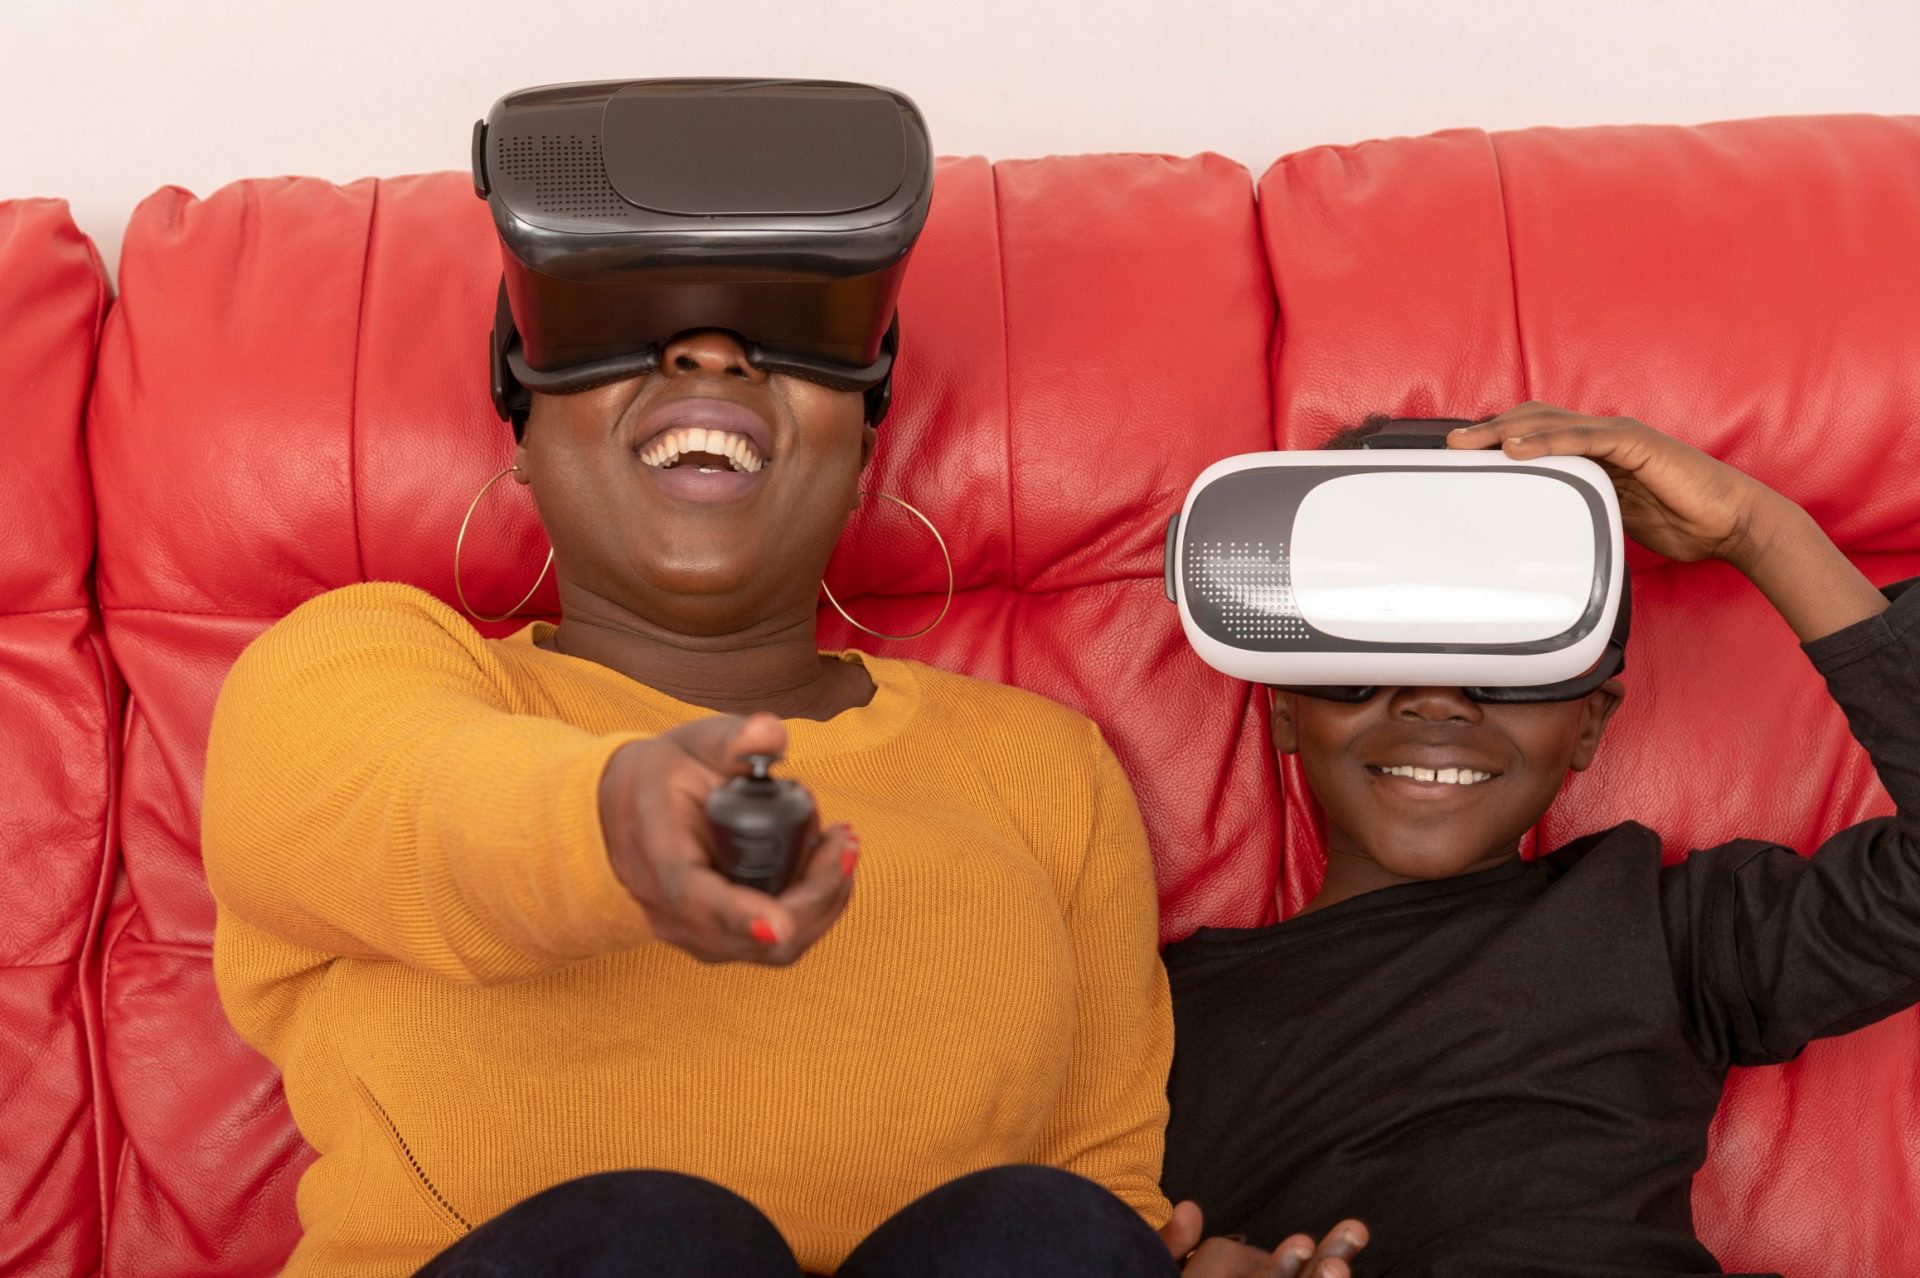 Mum and son playing VR video game